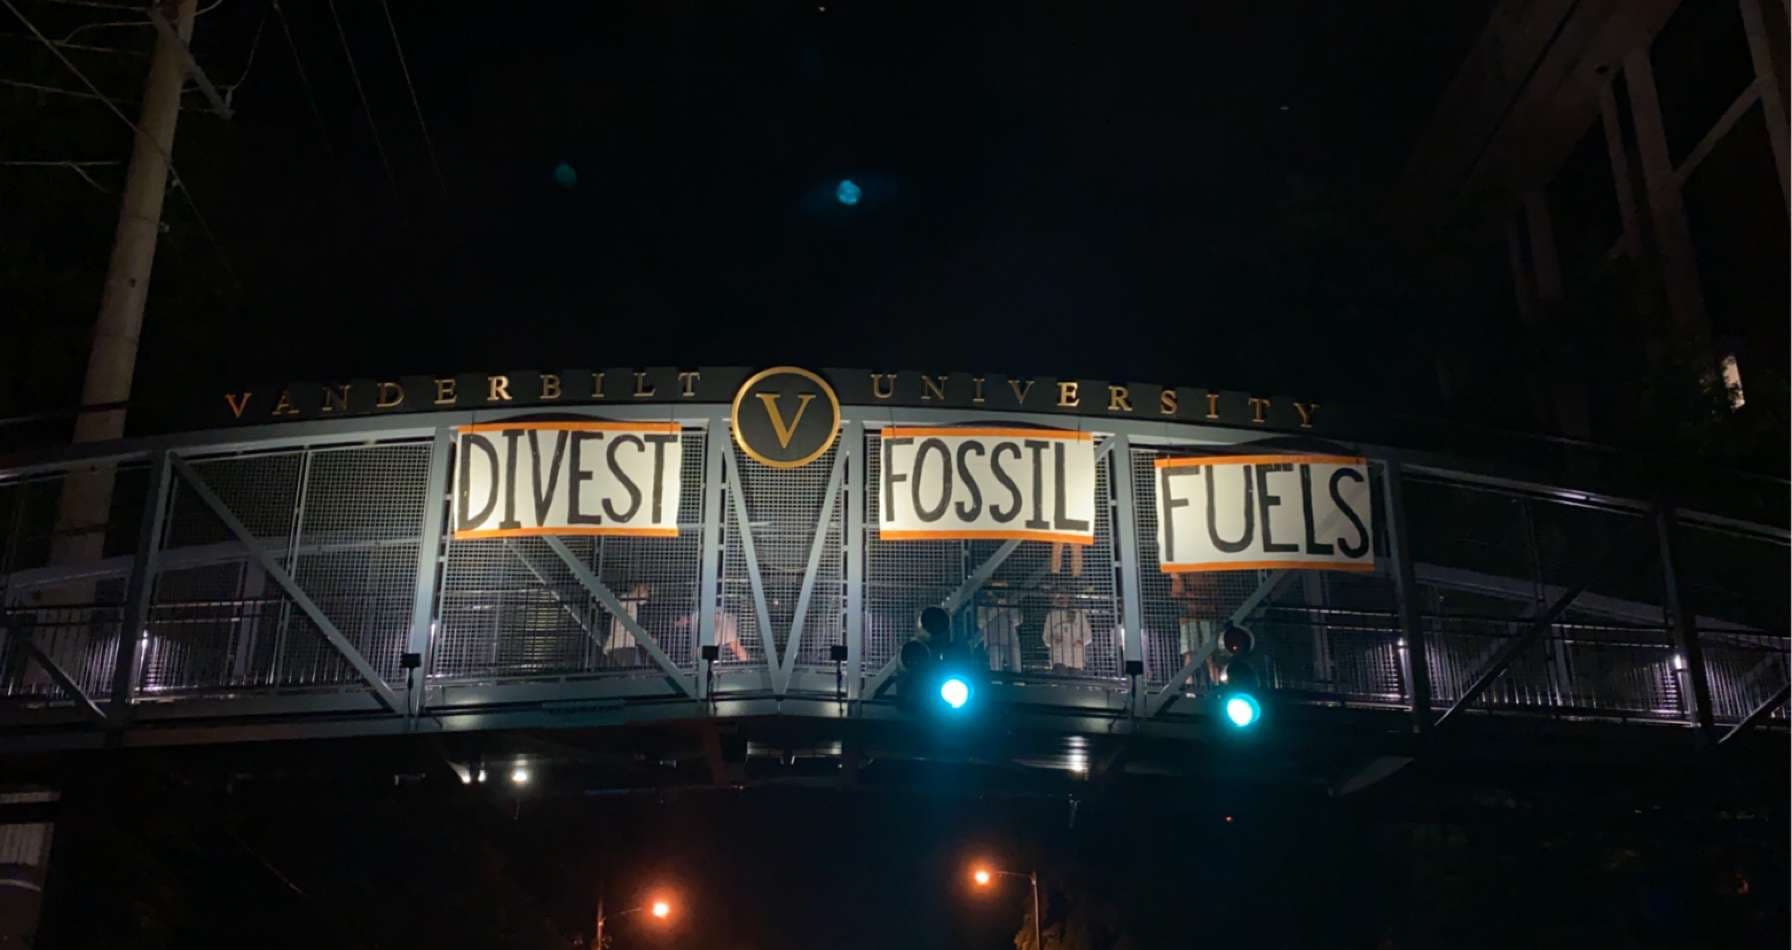 GUEST EDITORIAL: Vanderbilt, it’s time to divest from fossil fuels